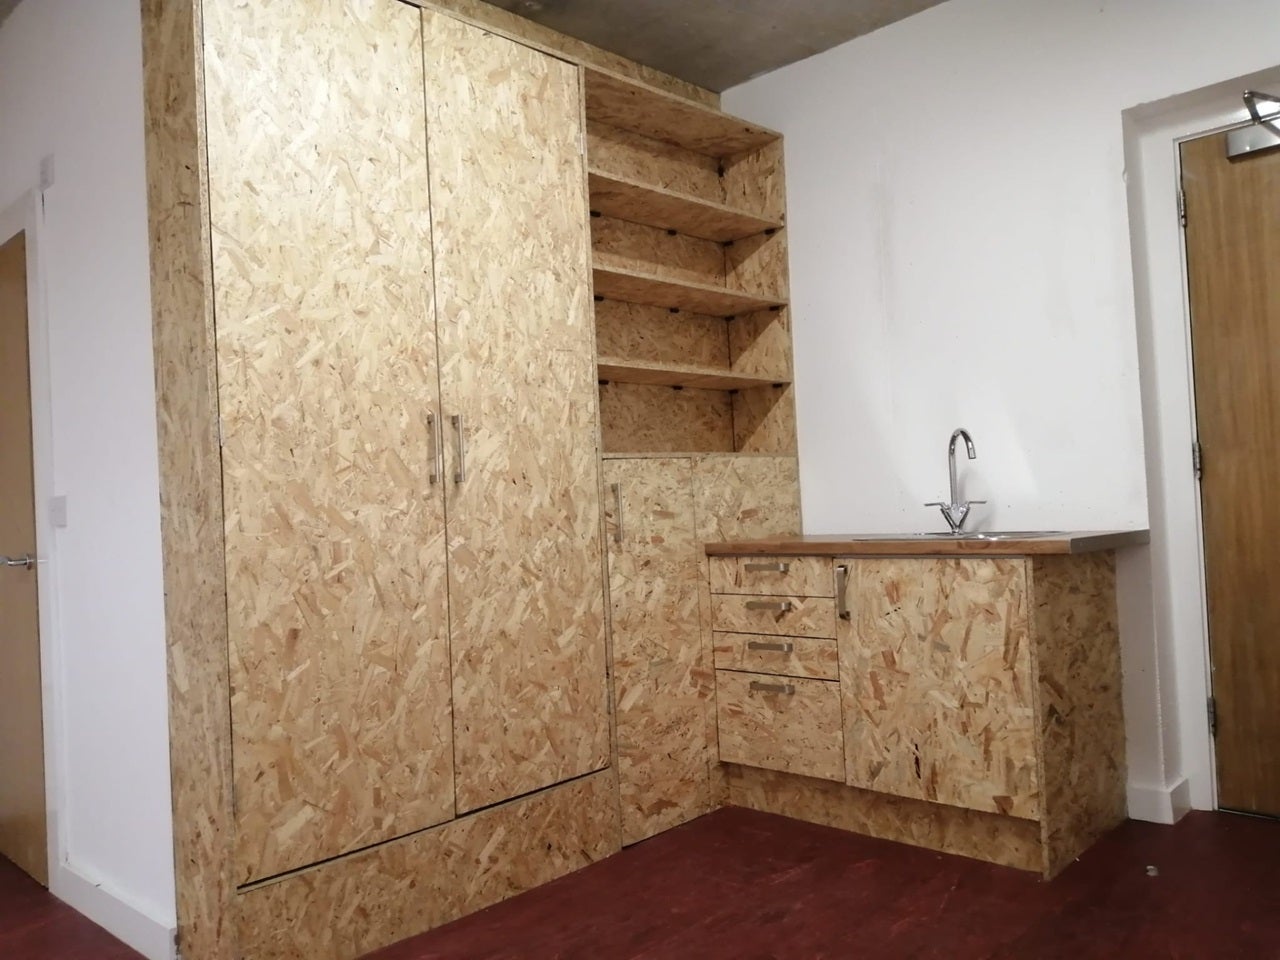 The property features floor-to-ceiling chipboard